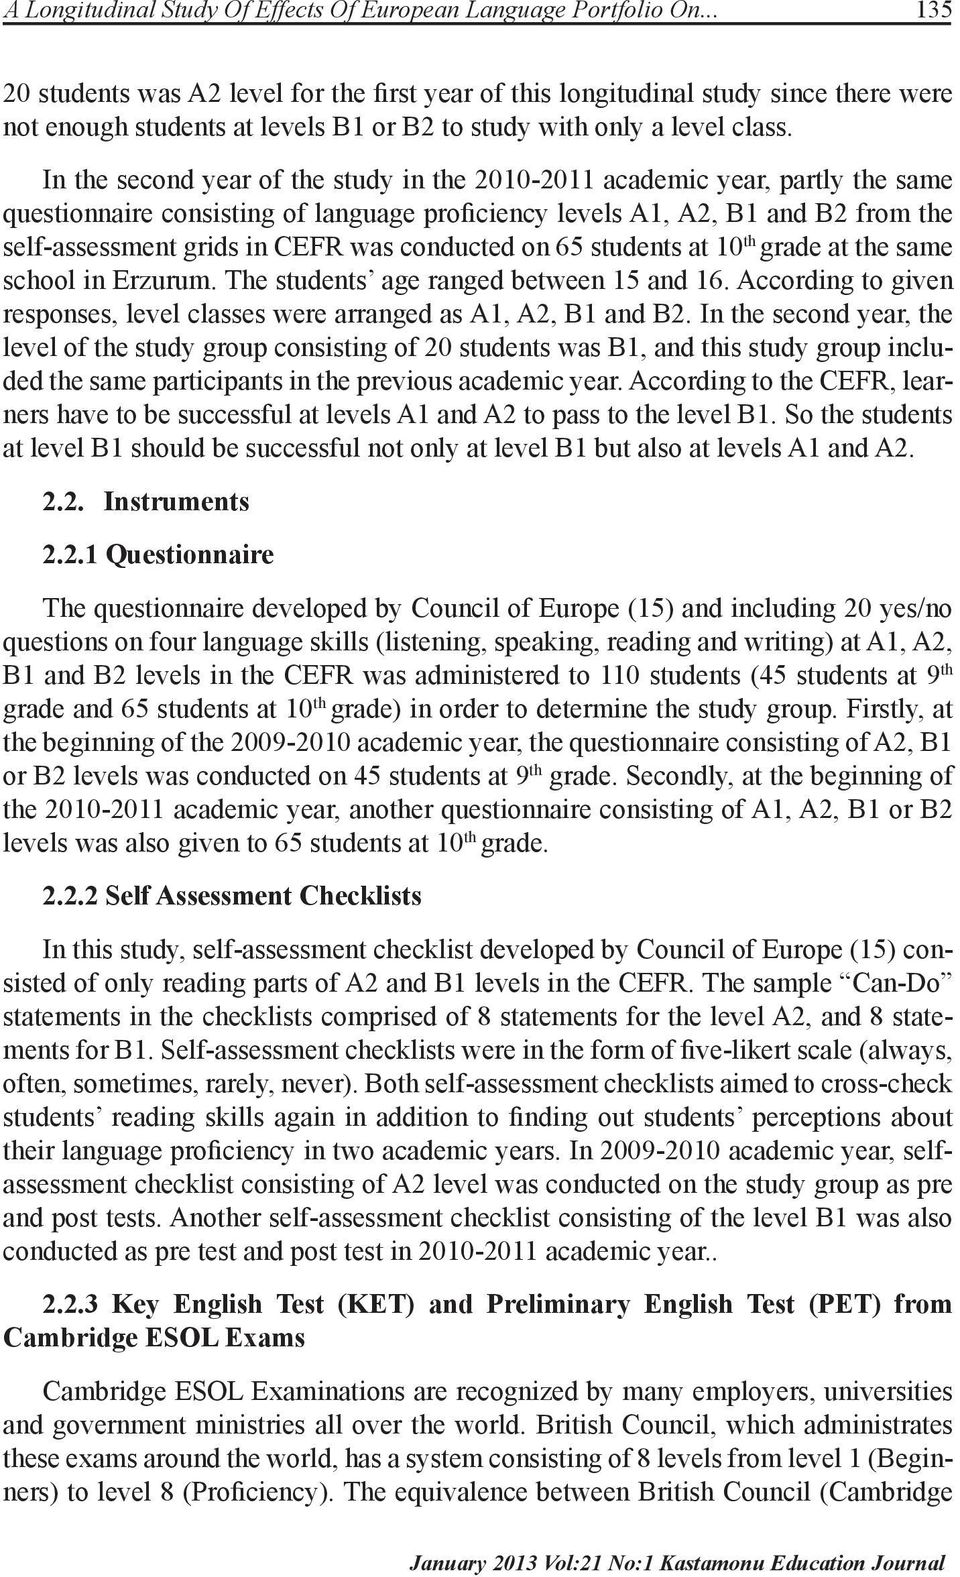 In the second year of the study in the 2010-2011 academic year, partly the same questionnaire consisting of language proficiency levels A1, A2, B1 and B2 from the self-assessment grids in CEFR was